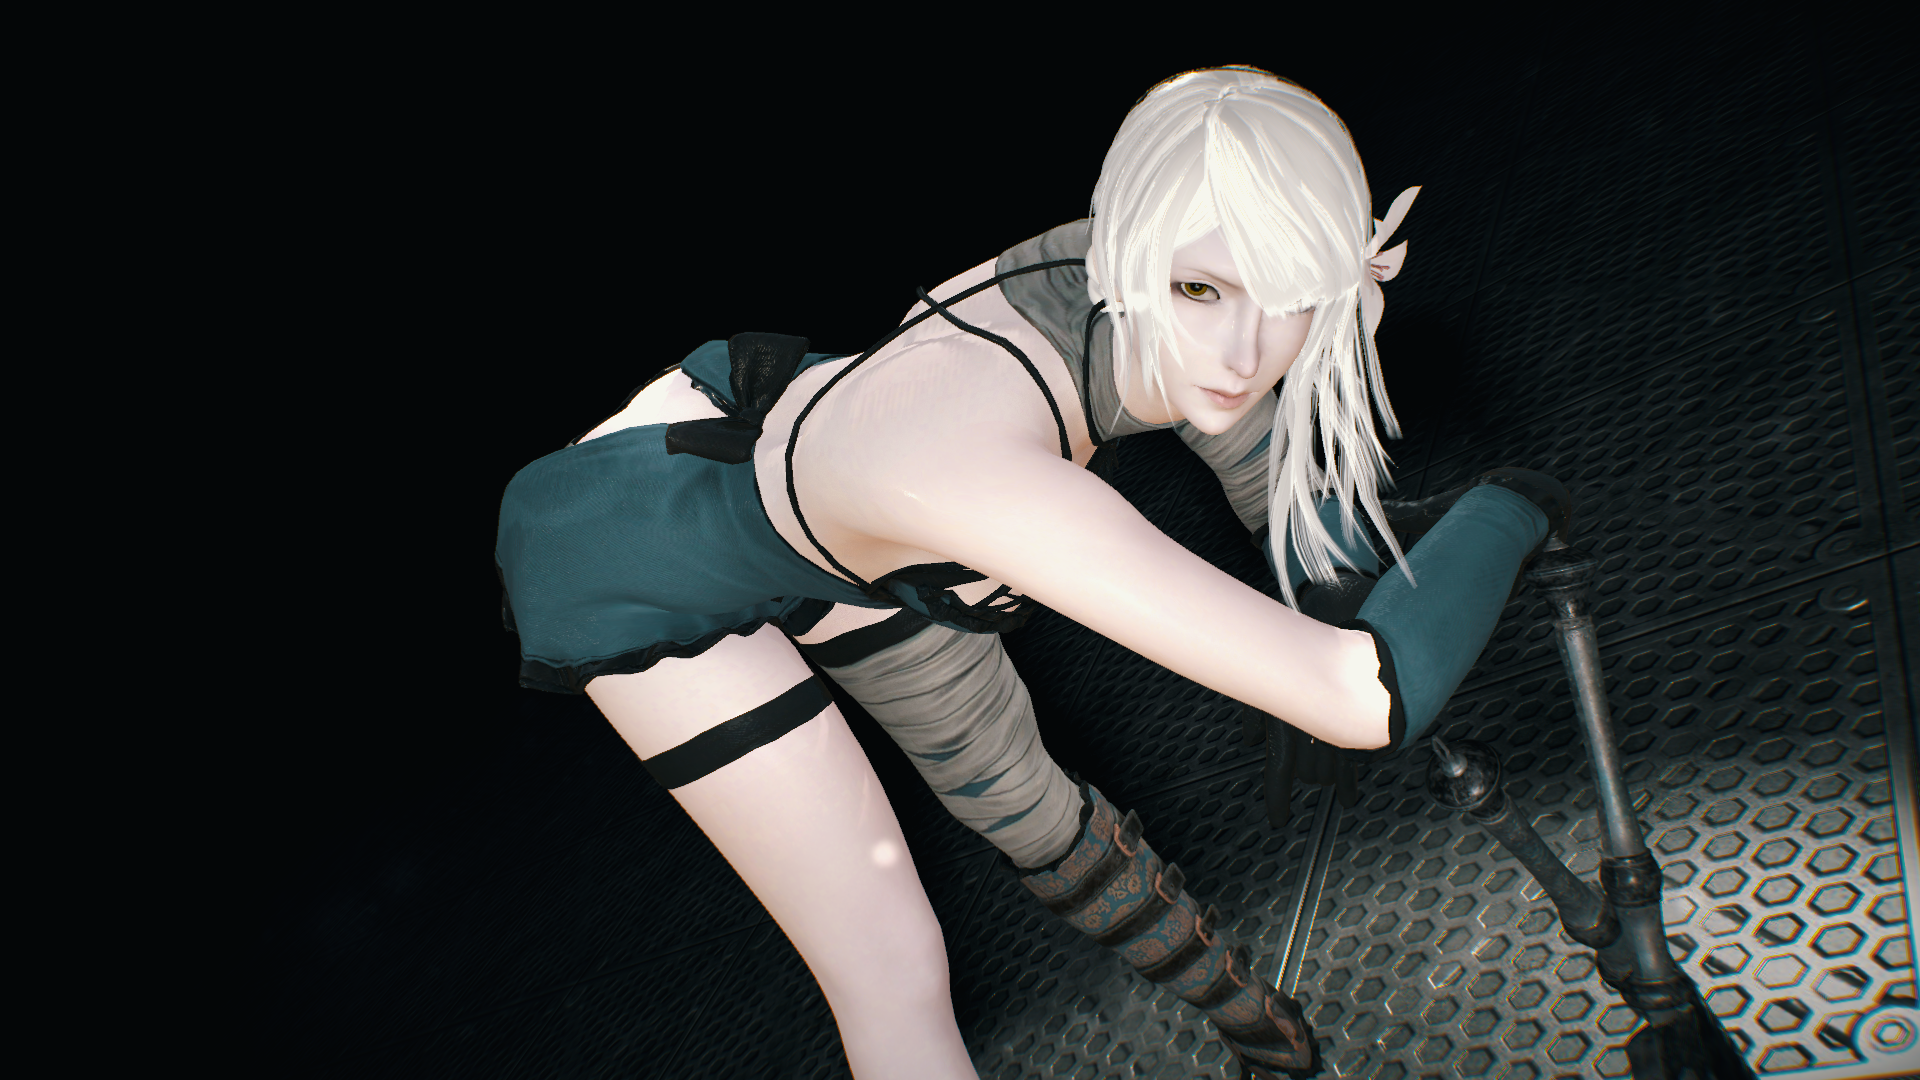 Kaine From Nier Replicant As Futa - Bent Pose